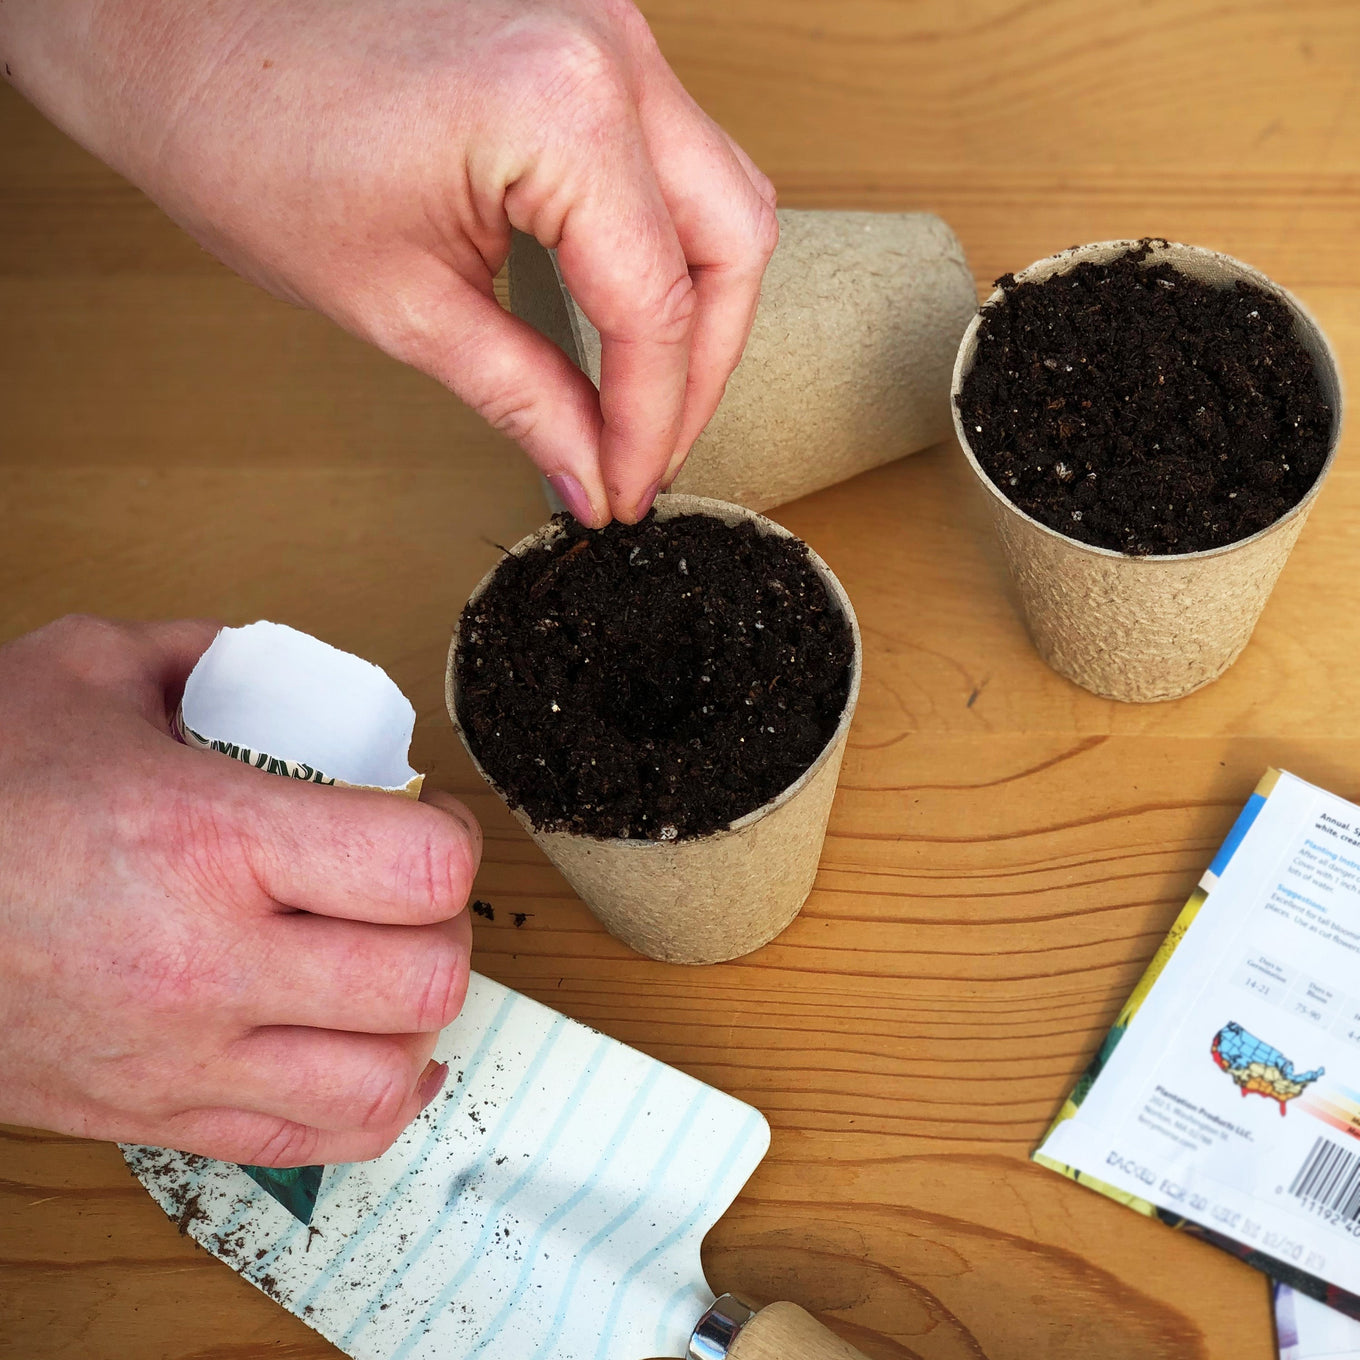 Start Georgia Southern Collards Greens seeds in Jiffy peat pots filled with sowing medium of your choice for easy transplanting.